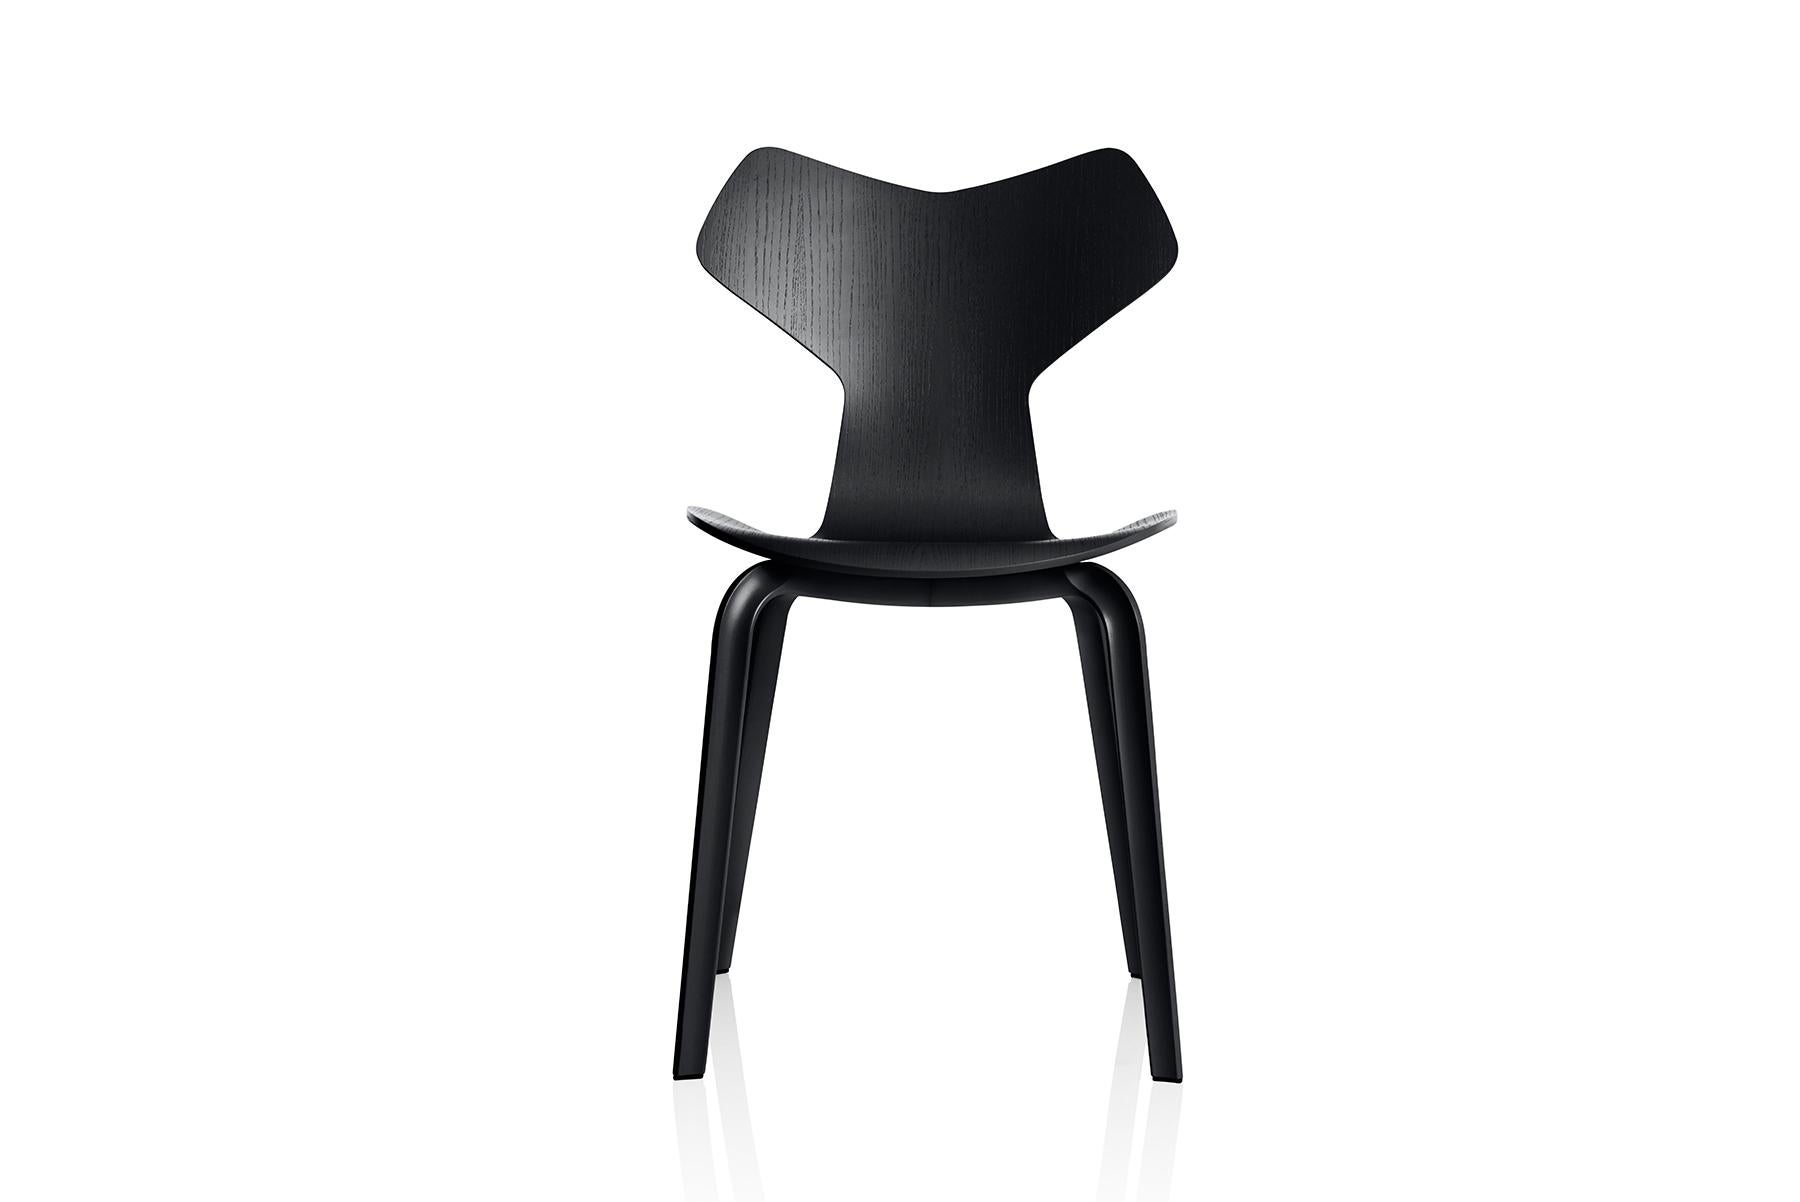 The Grand Prix chair was designed by the Danish architect and designer Arne Jacobsen in 1957 and was first presented at the Spring Exhibition for Danish crafts and furniture design. The chair was originally presented as Model 3130 but was renamed